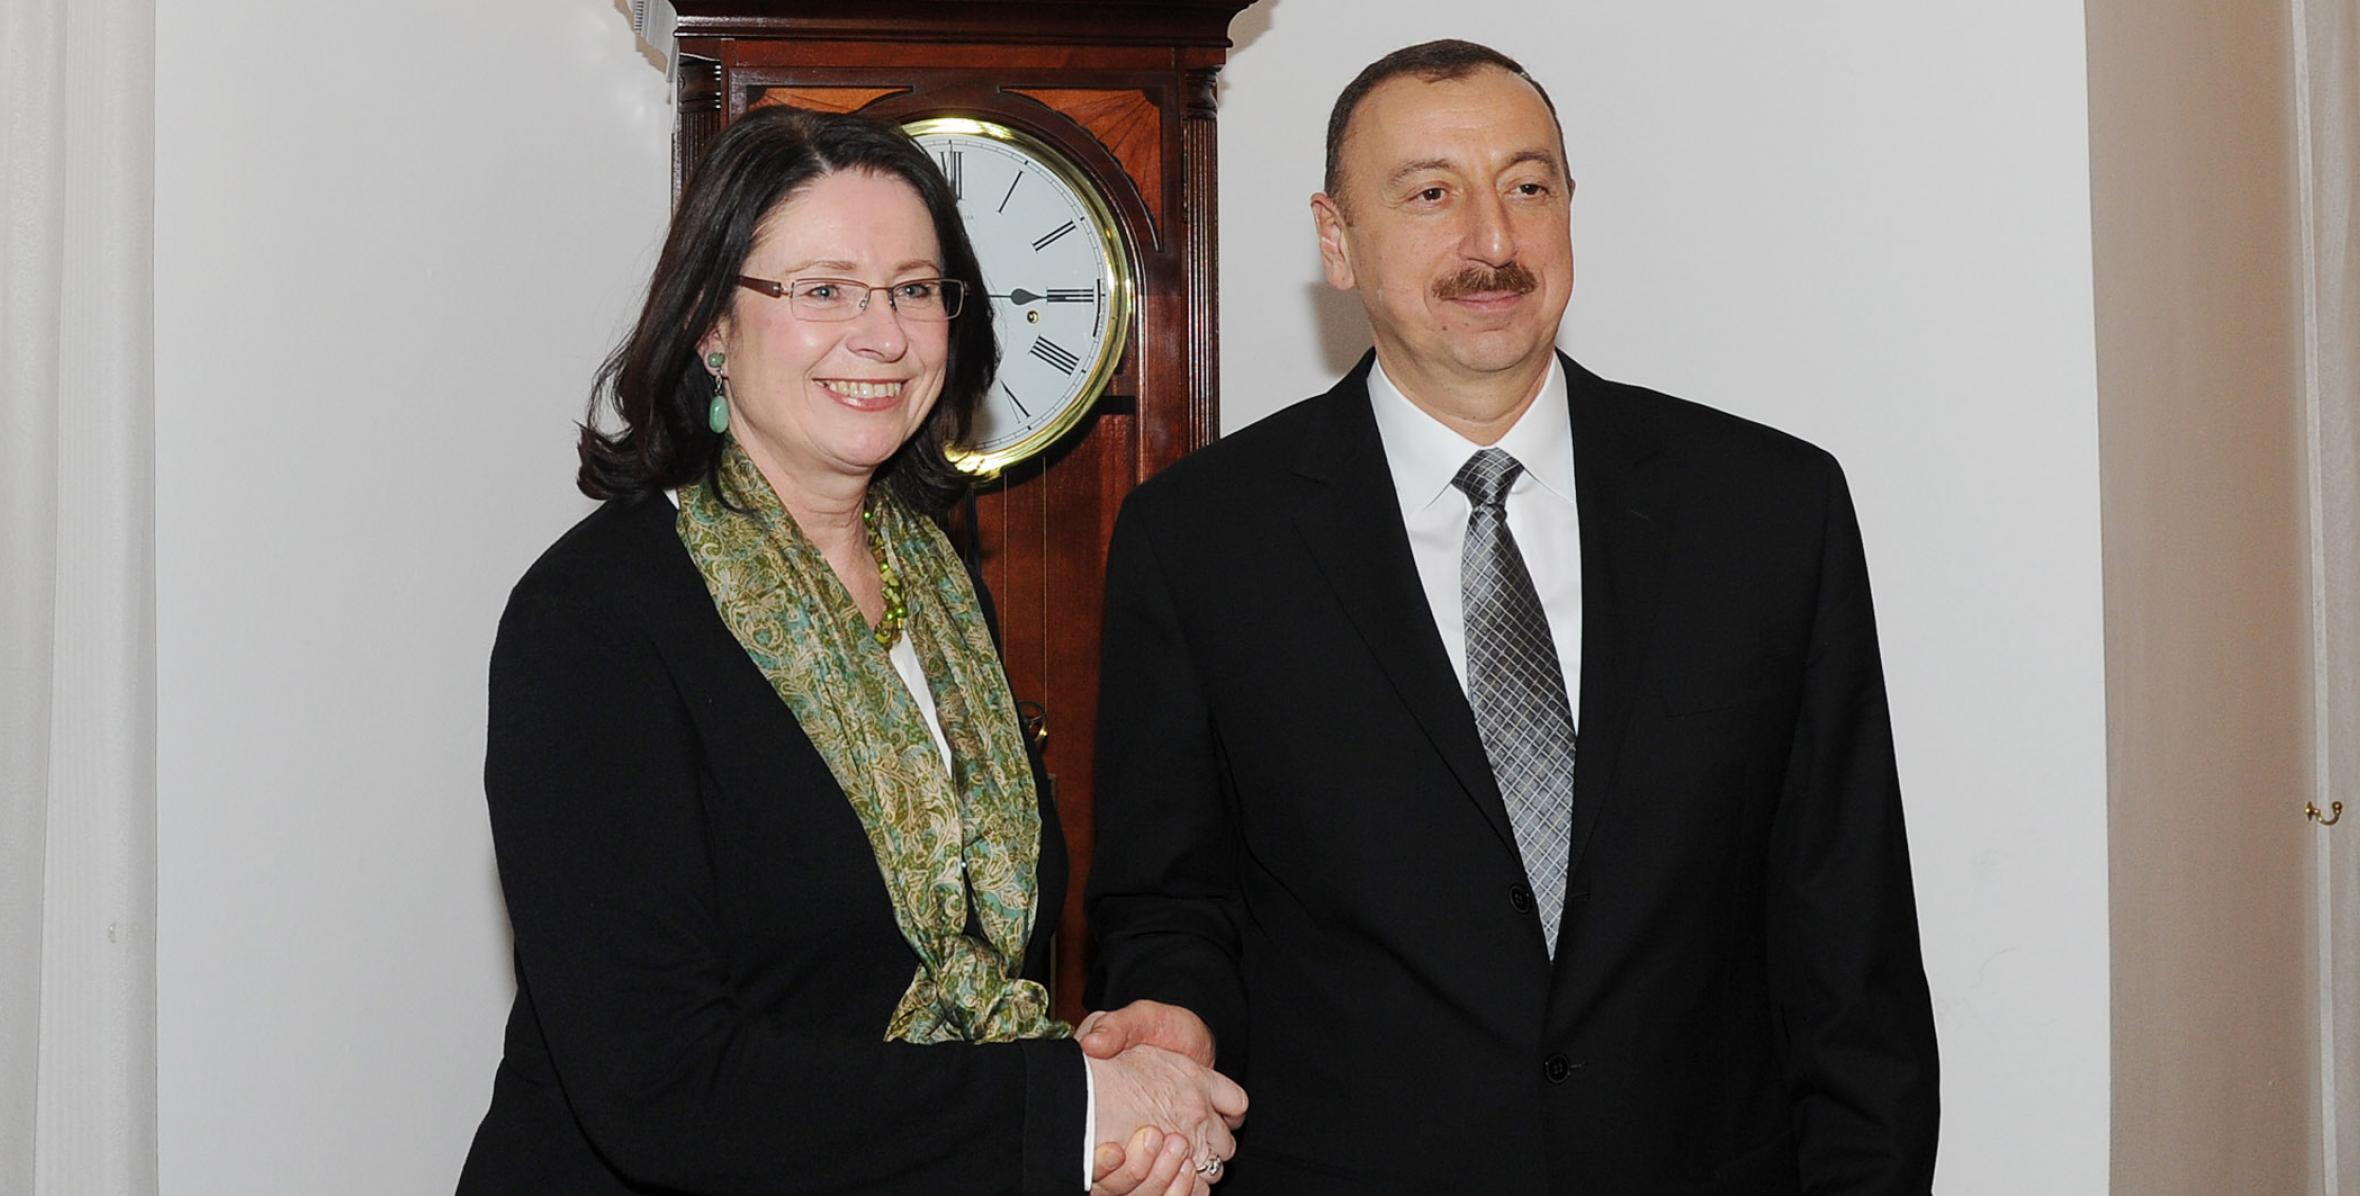 Ilham Aliyev met with the Speaker of the Chamber of Deputies of the Parliament of the Czech Republic, Miroslava Nemcova